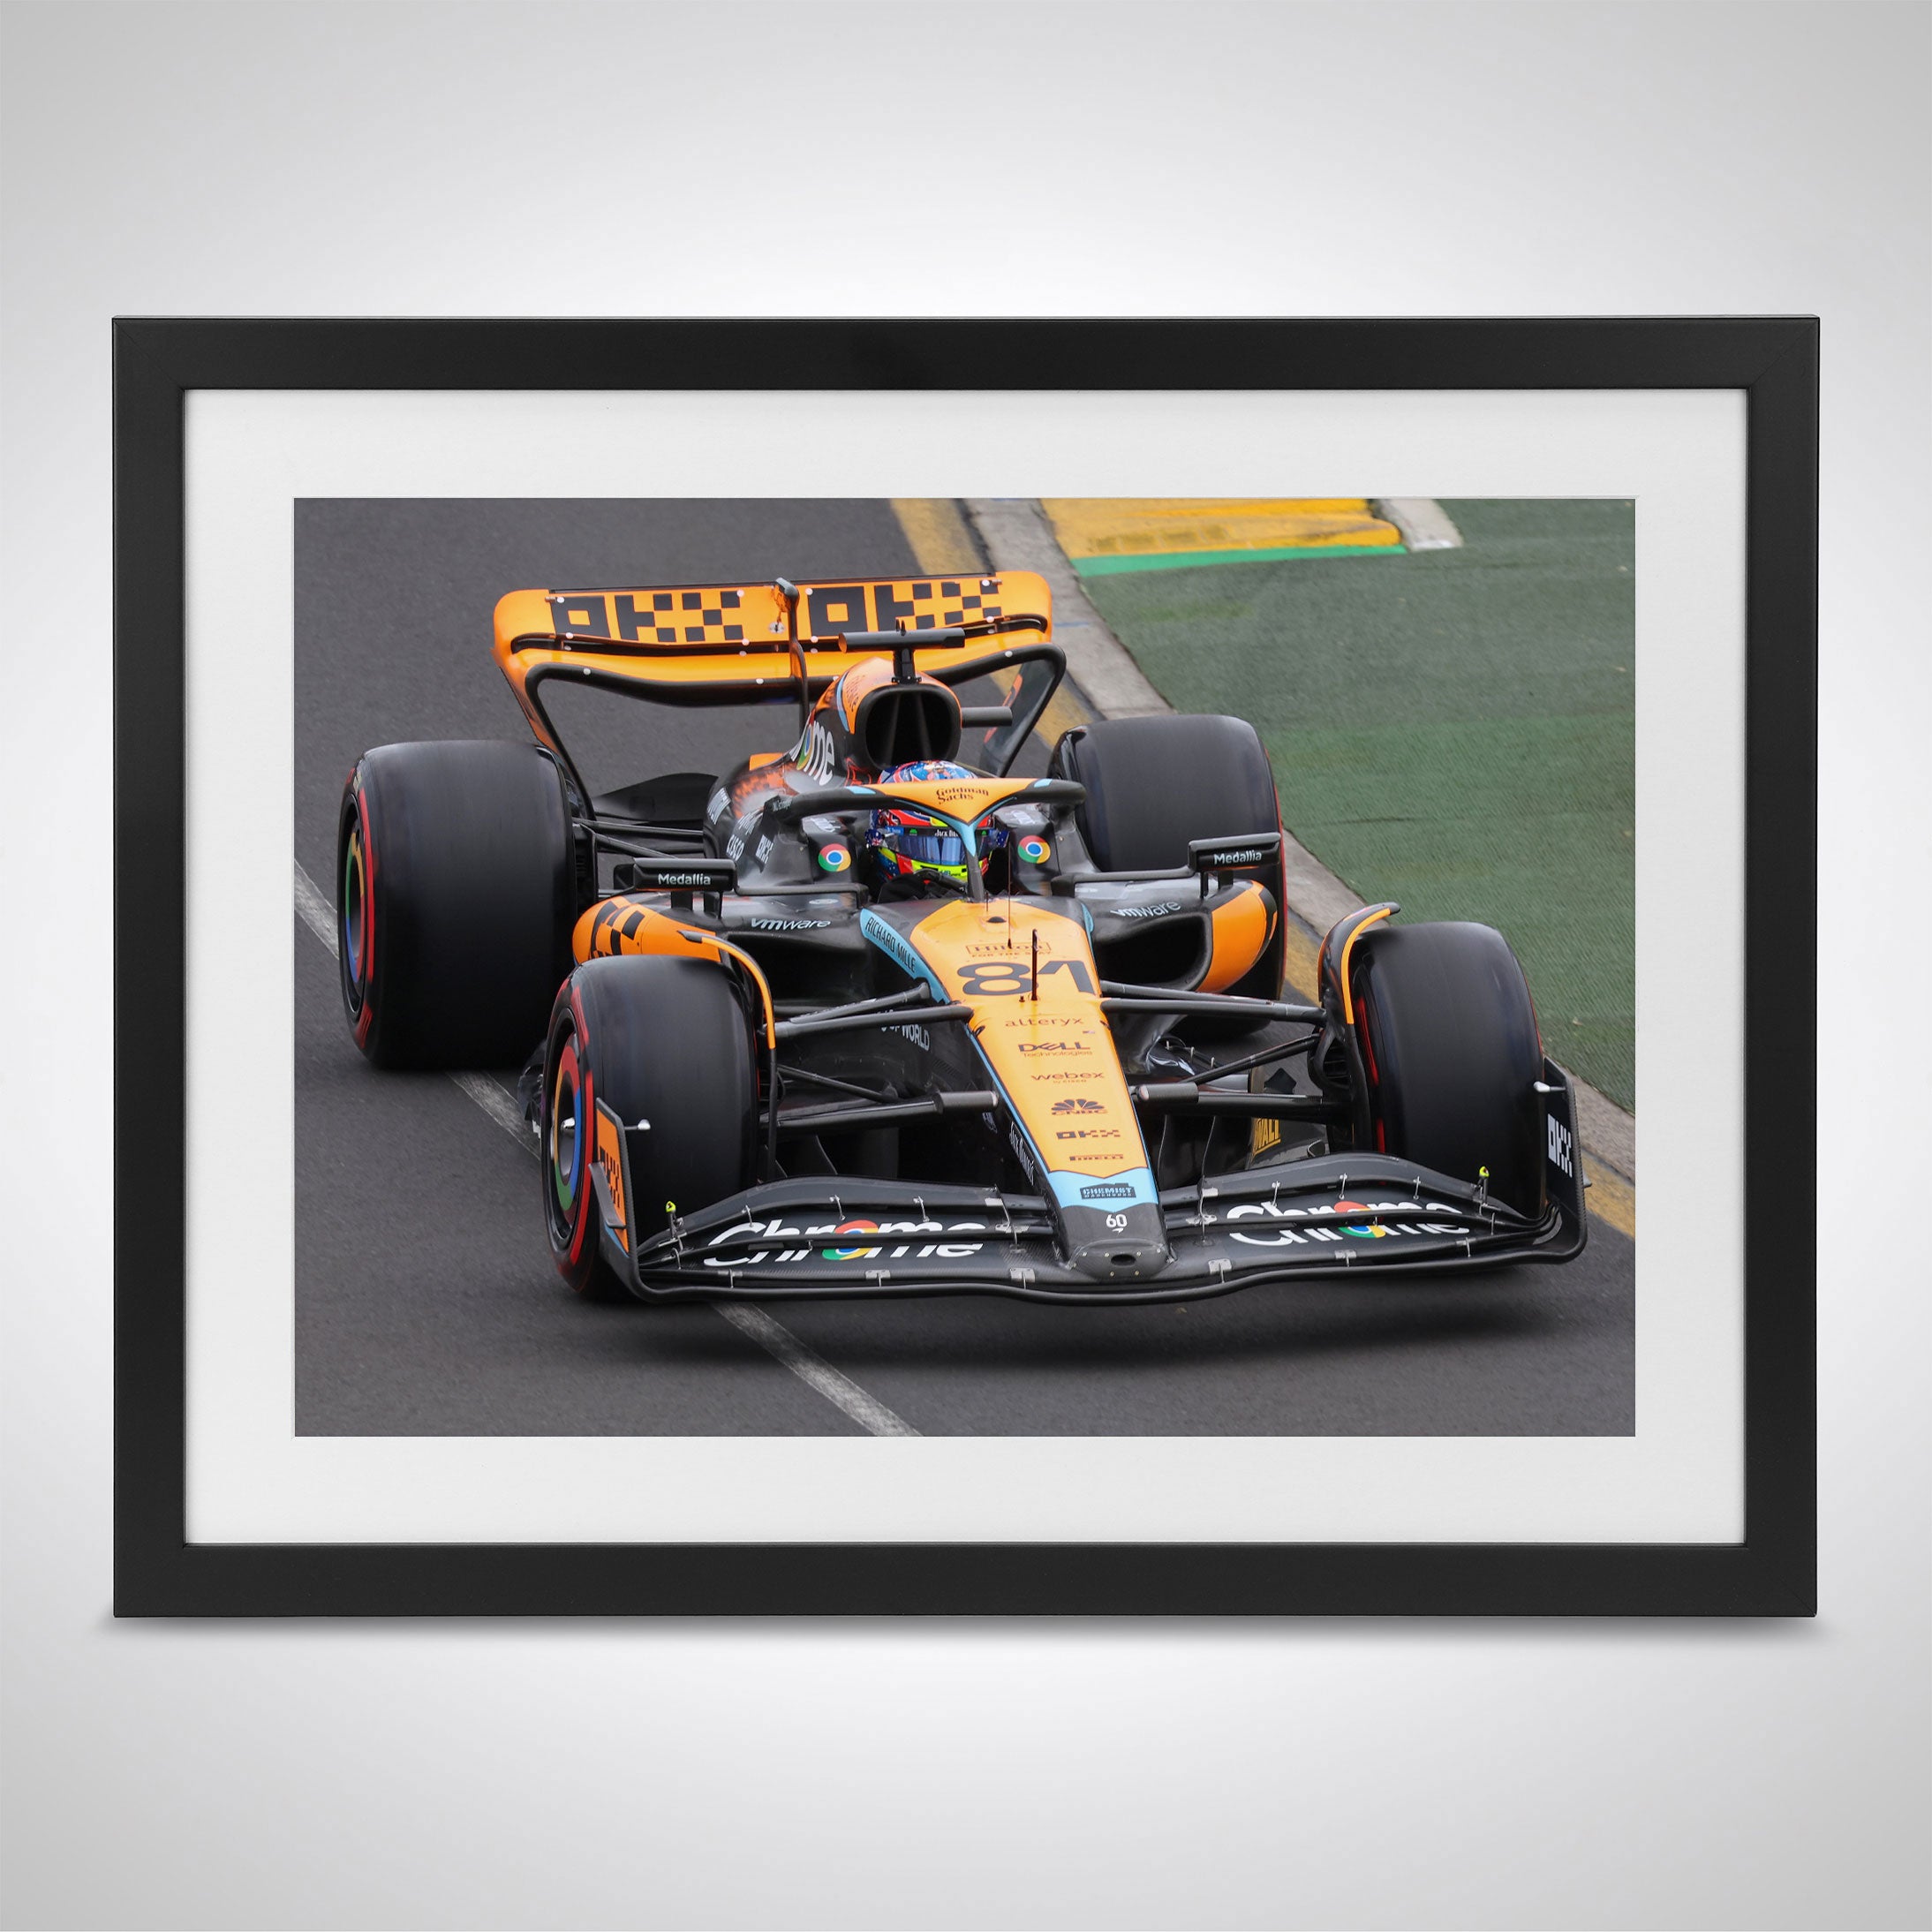 Formula 1 World Champions F1 Paintings Printed on Canvas